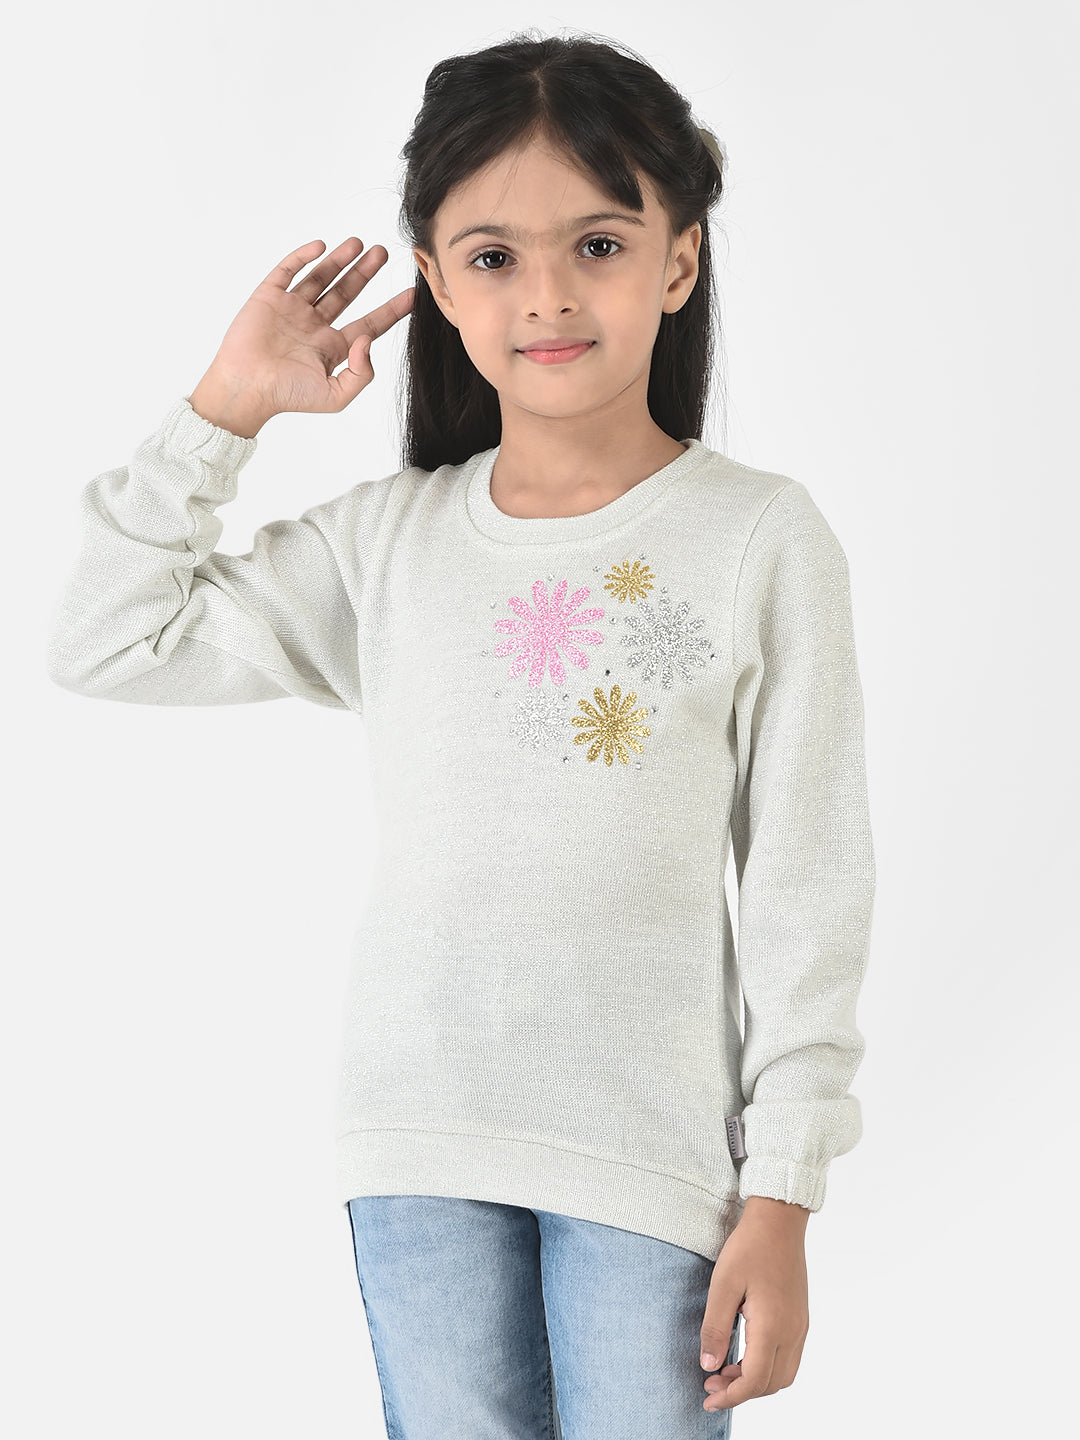 Off-White Sweater with Shimmery Flowers